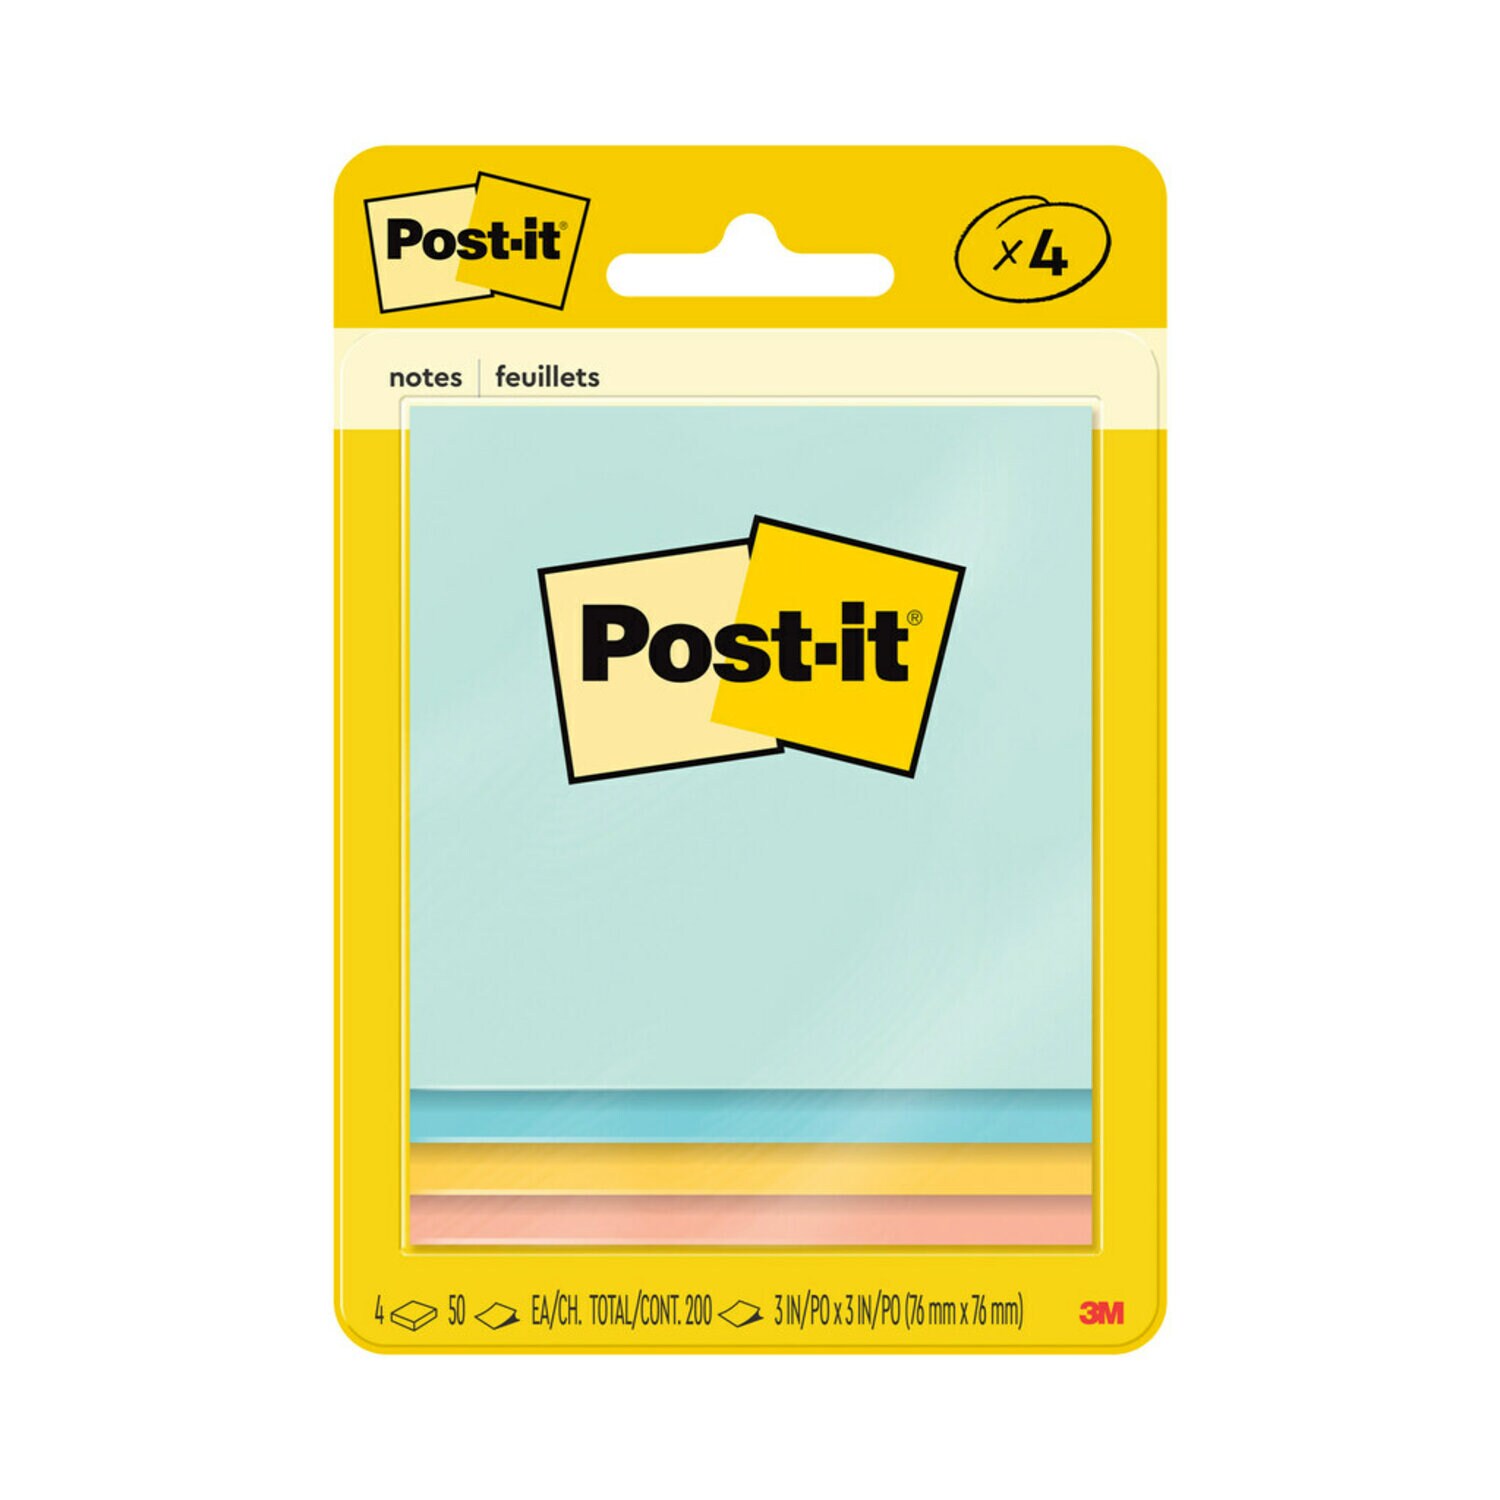 7100106002 - Post-it Notes 5401, 3 in x 3 in (76 mm x 76 mm), Pastel colors